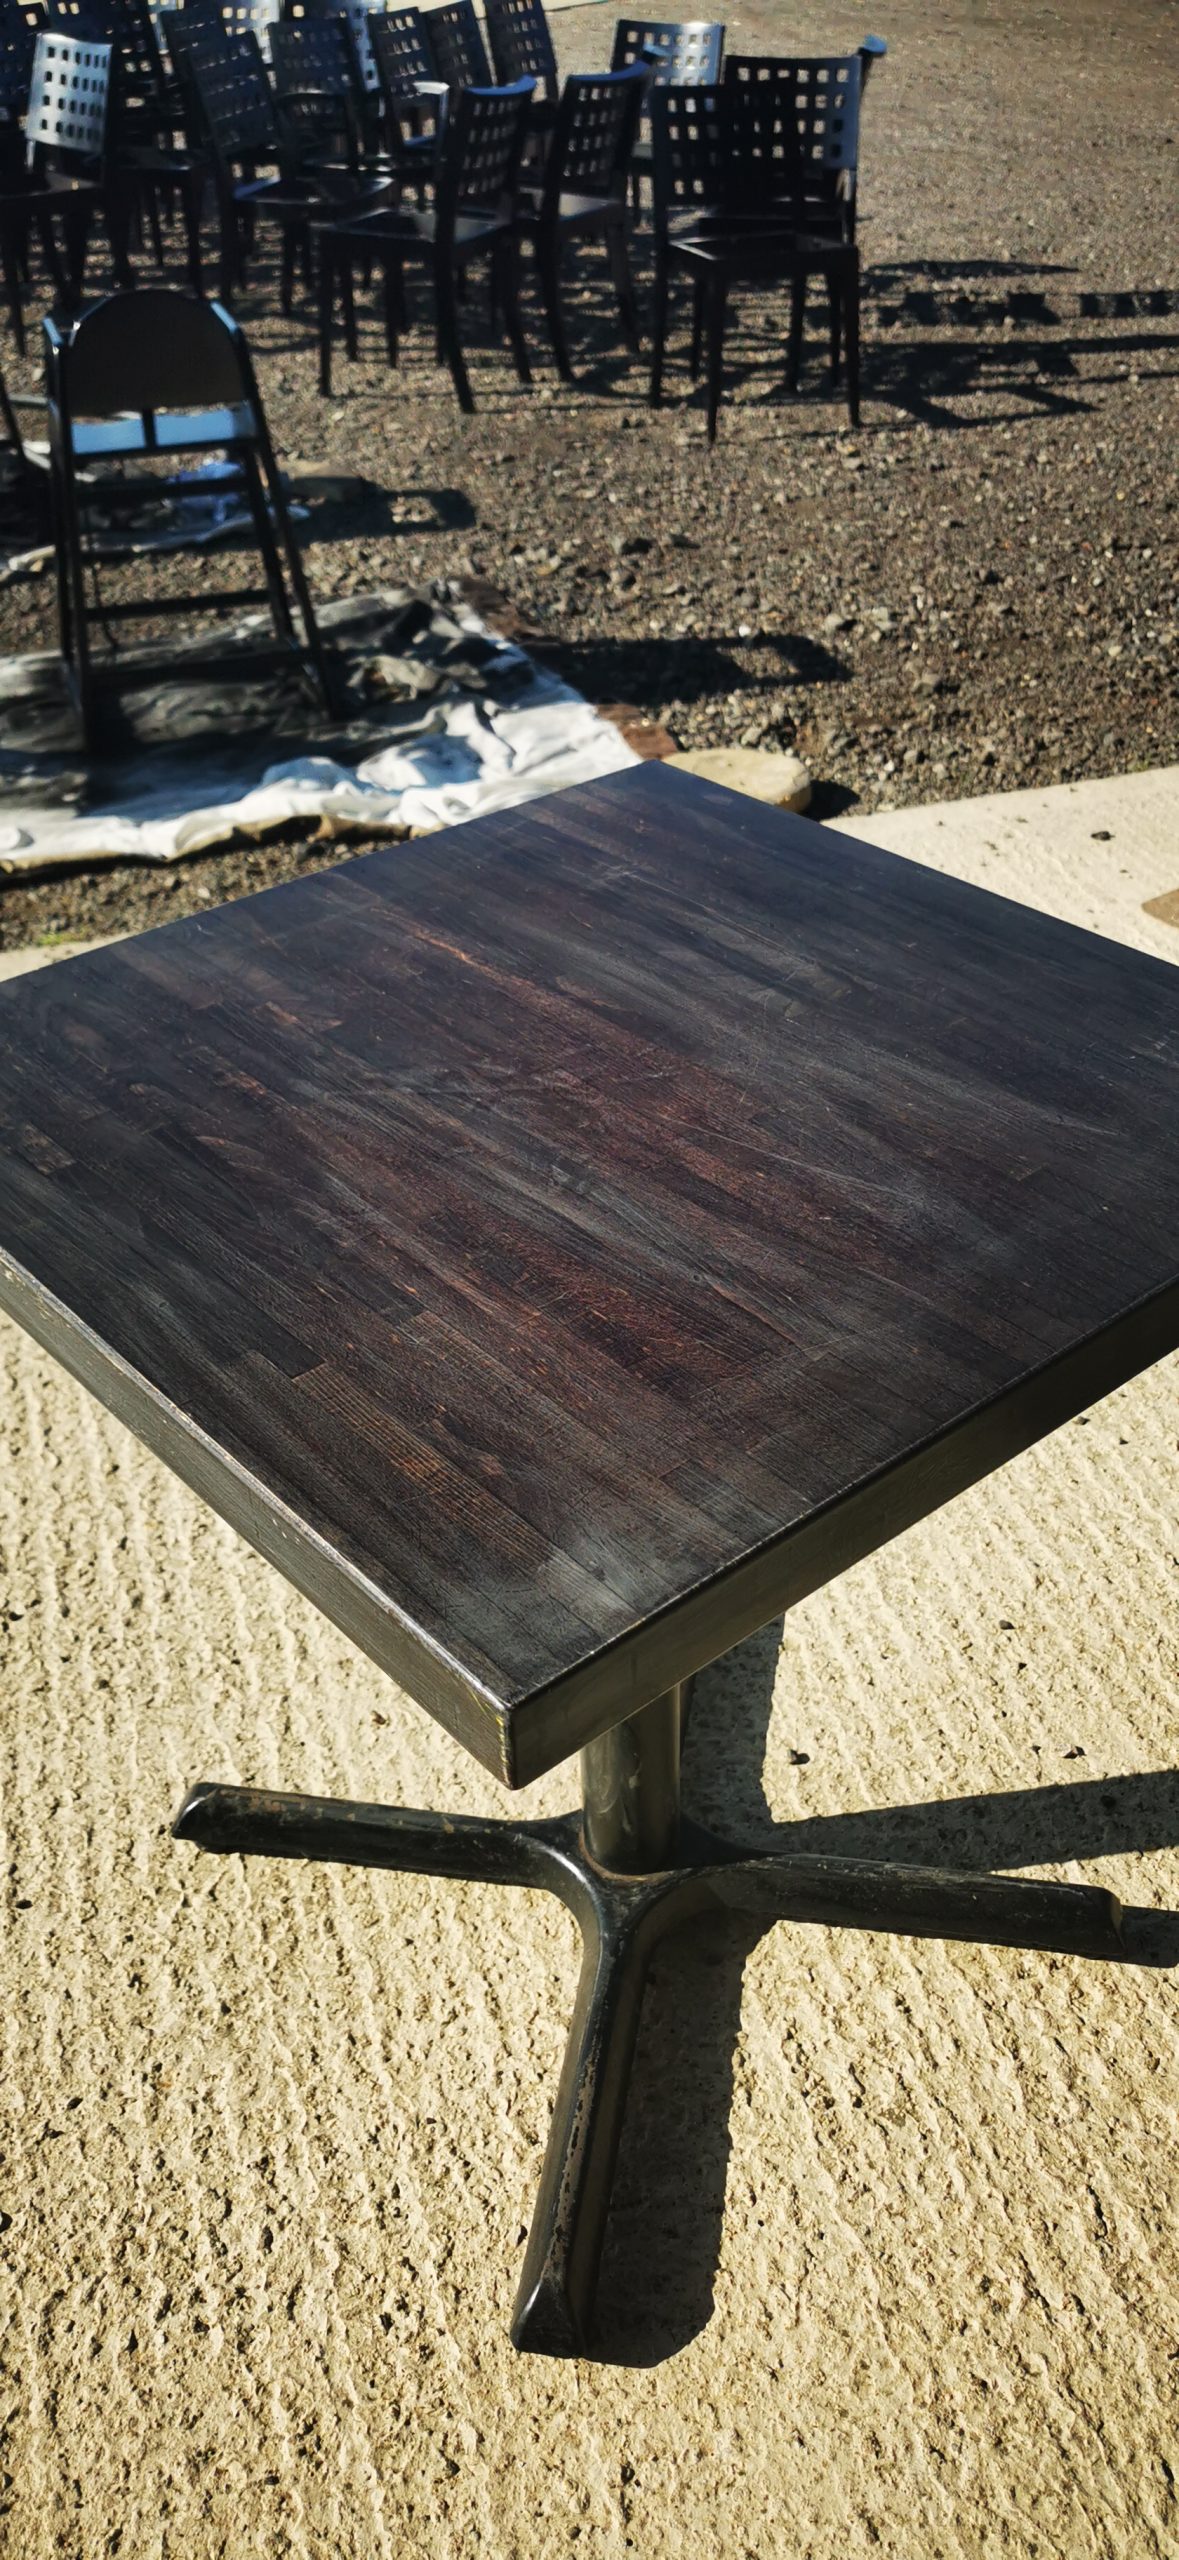 sanded down table